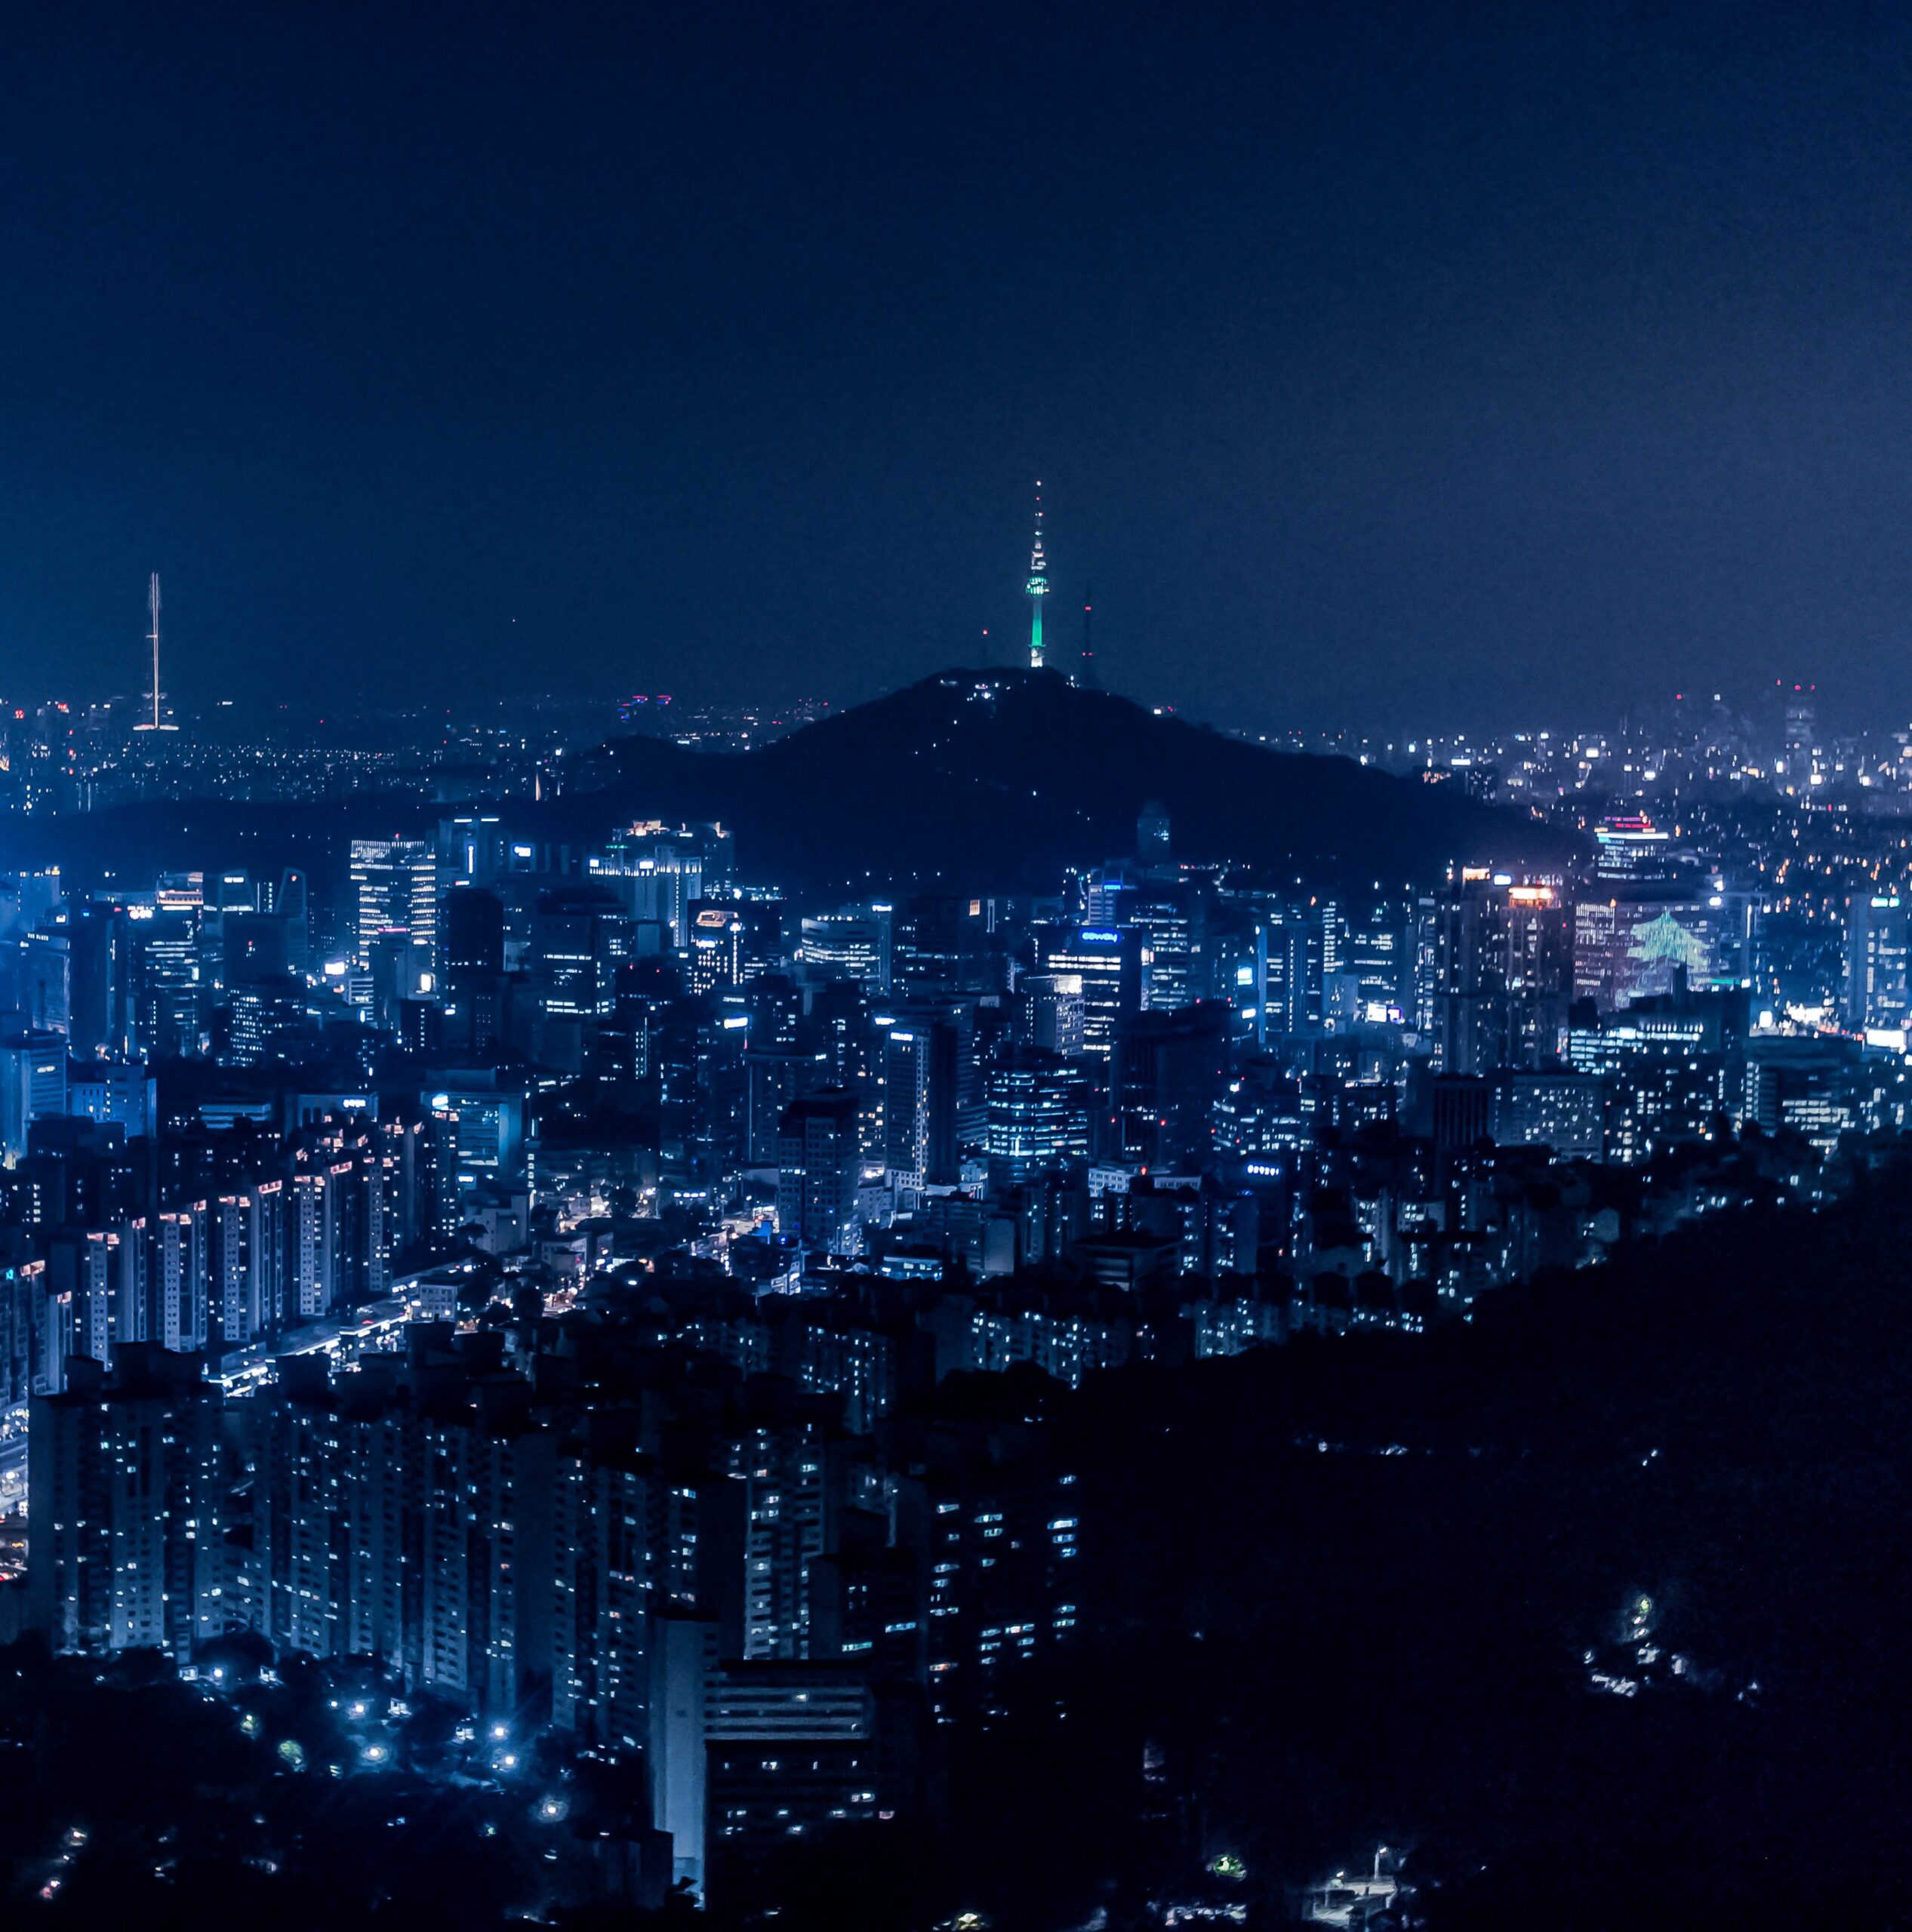 A Photograph of the Seoul cityscape at night, including the N Seoul Tower.